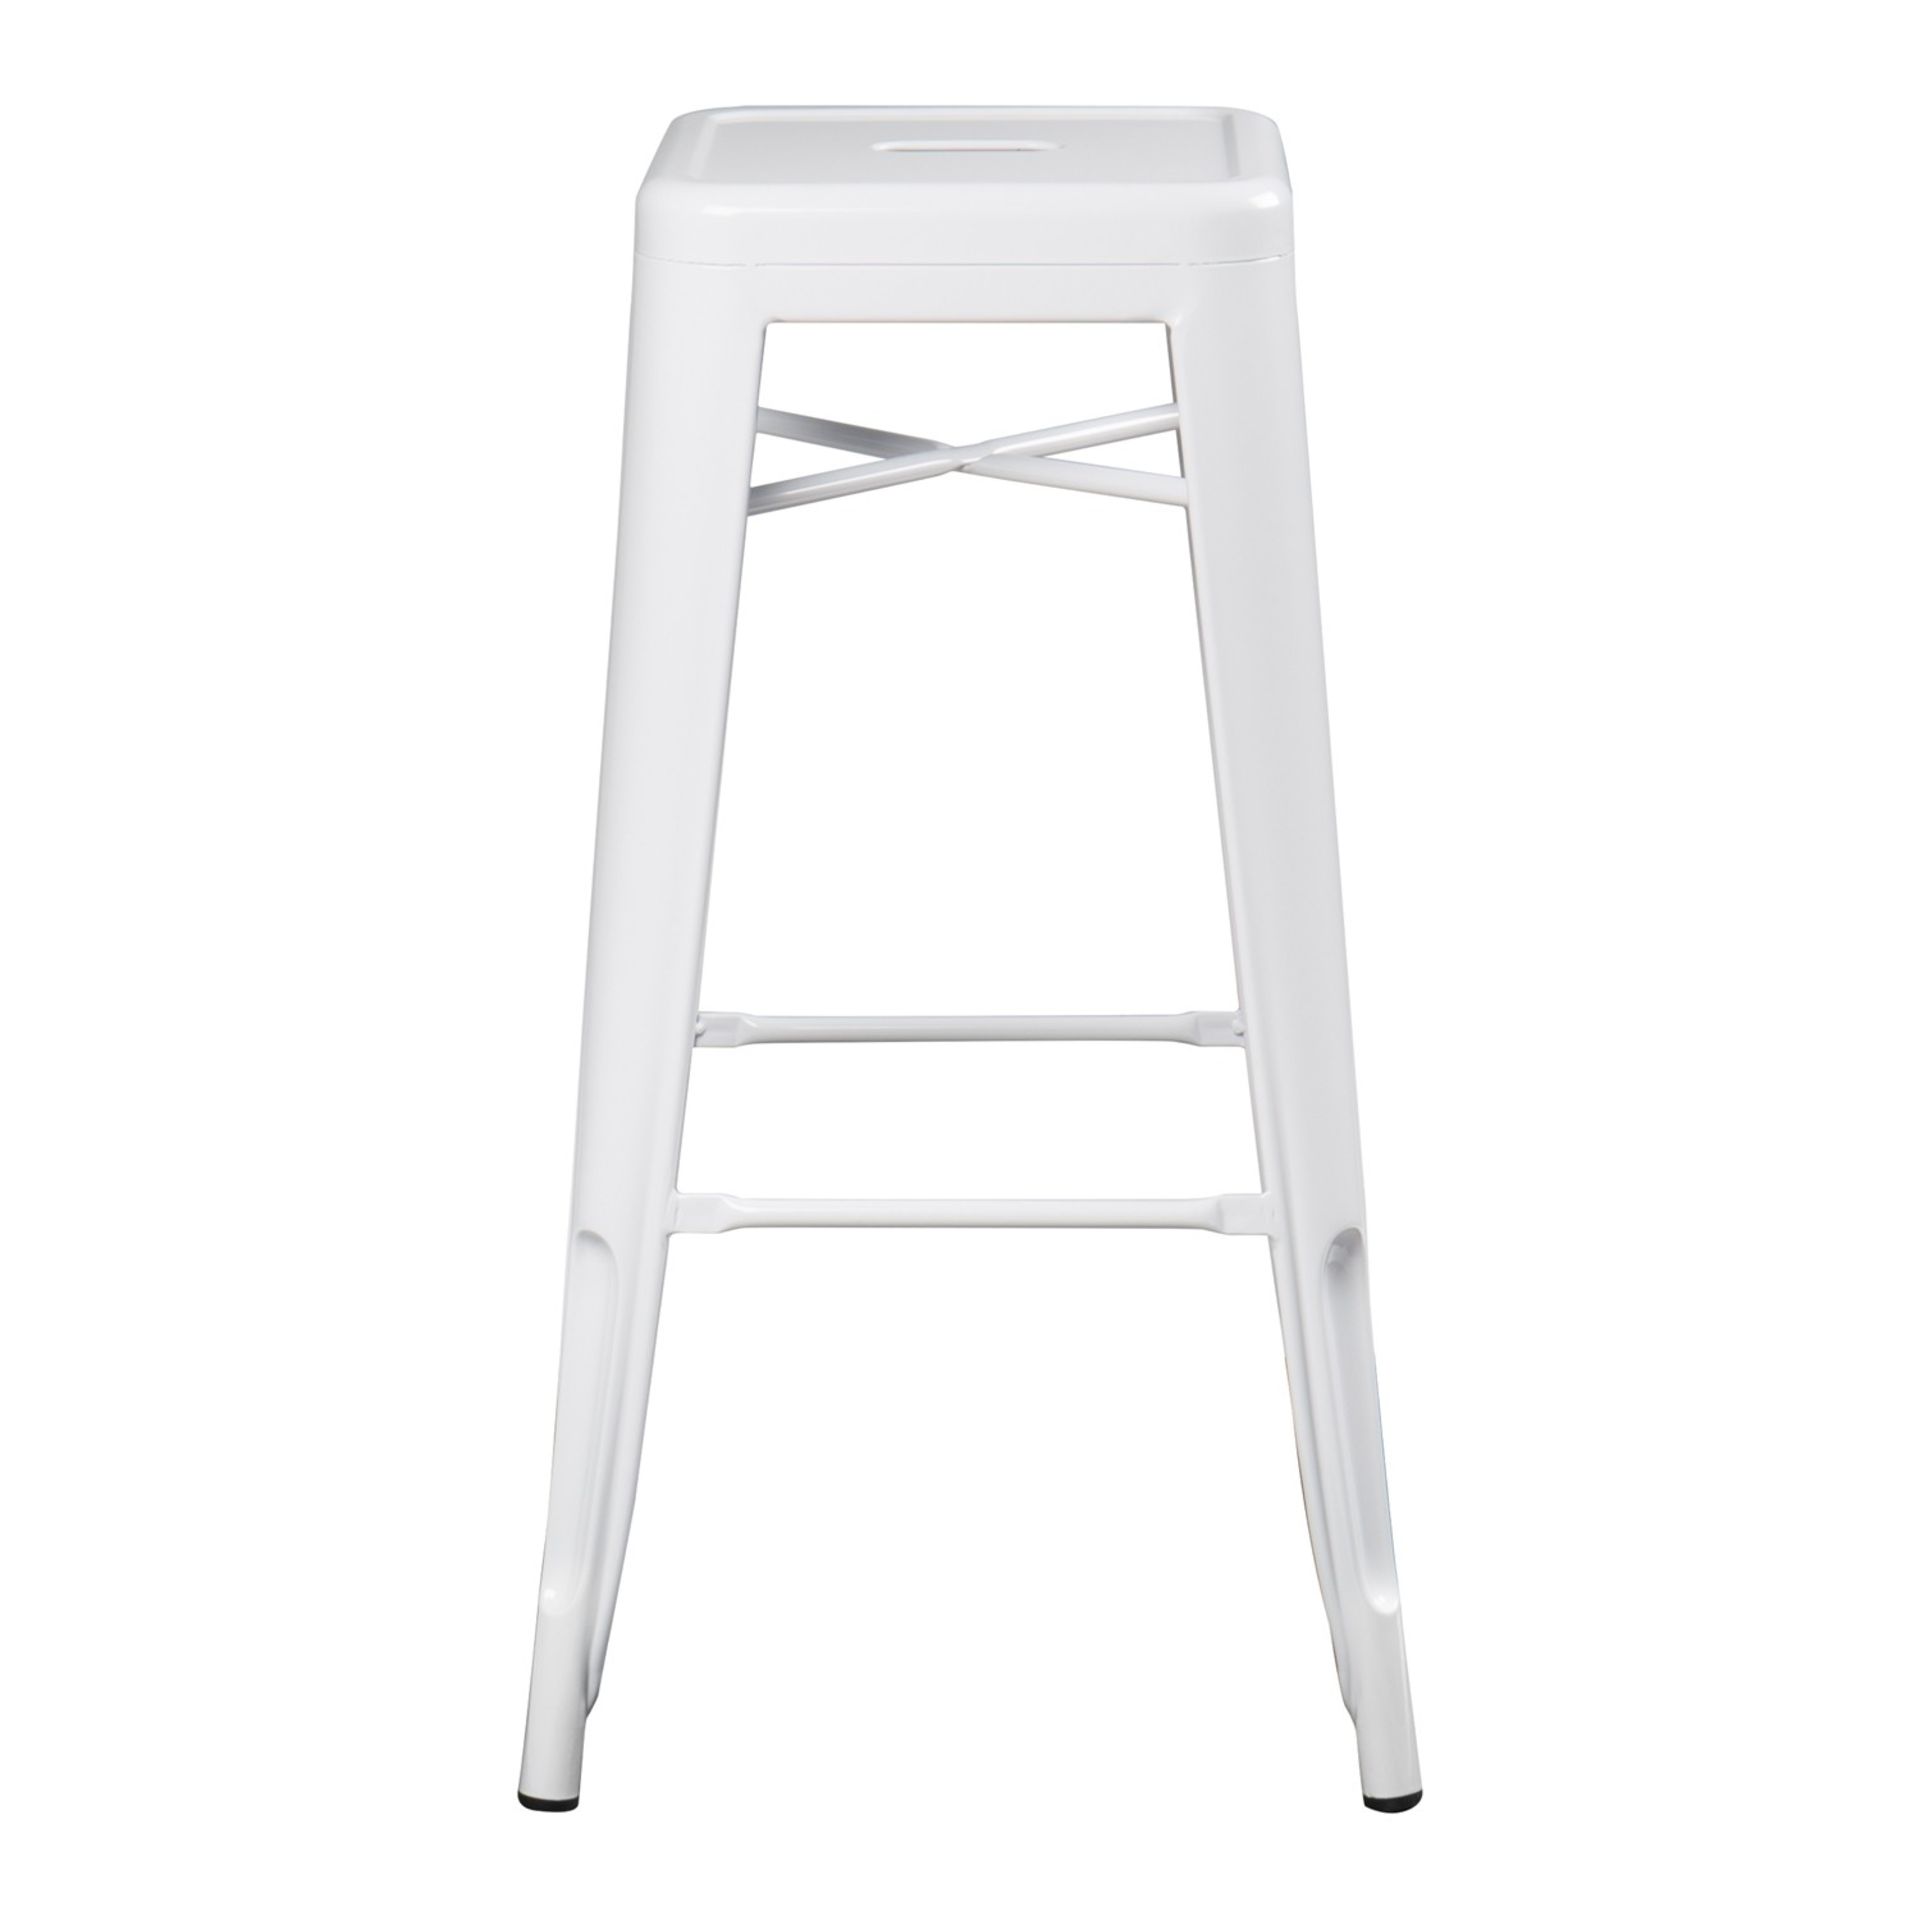 2 x Xavier Pauchard Inspired Industrial White Bar Stools - Pair of - Lightweight and Stackable - - Image 2 of 4